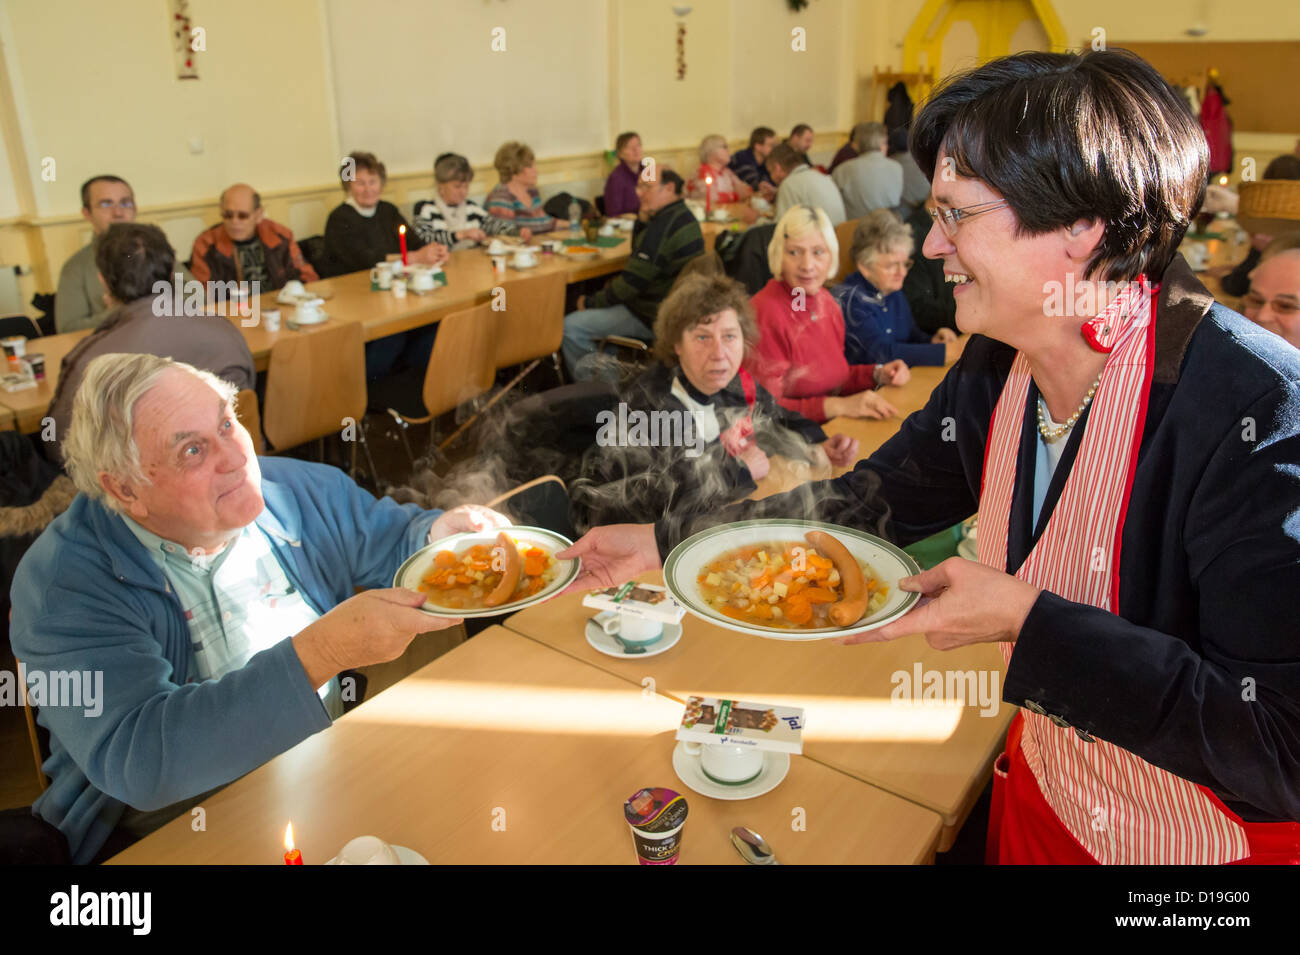 Premier of Thuringia Christine Lieberknecht serves food to the needy at the 'Restaurant des Herzens' (Restaurant of the Heart) in Erfurt, Germany, 11 December 2012. Up to 220 people in need can recieve warm meals hear on workdays until 06 February. Photo: Michael Reichel Stock Photo